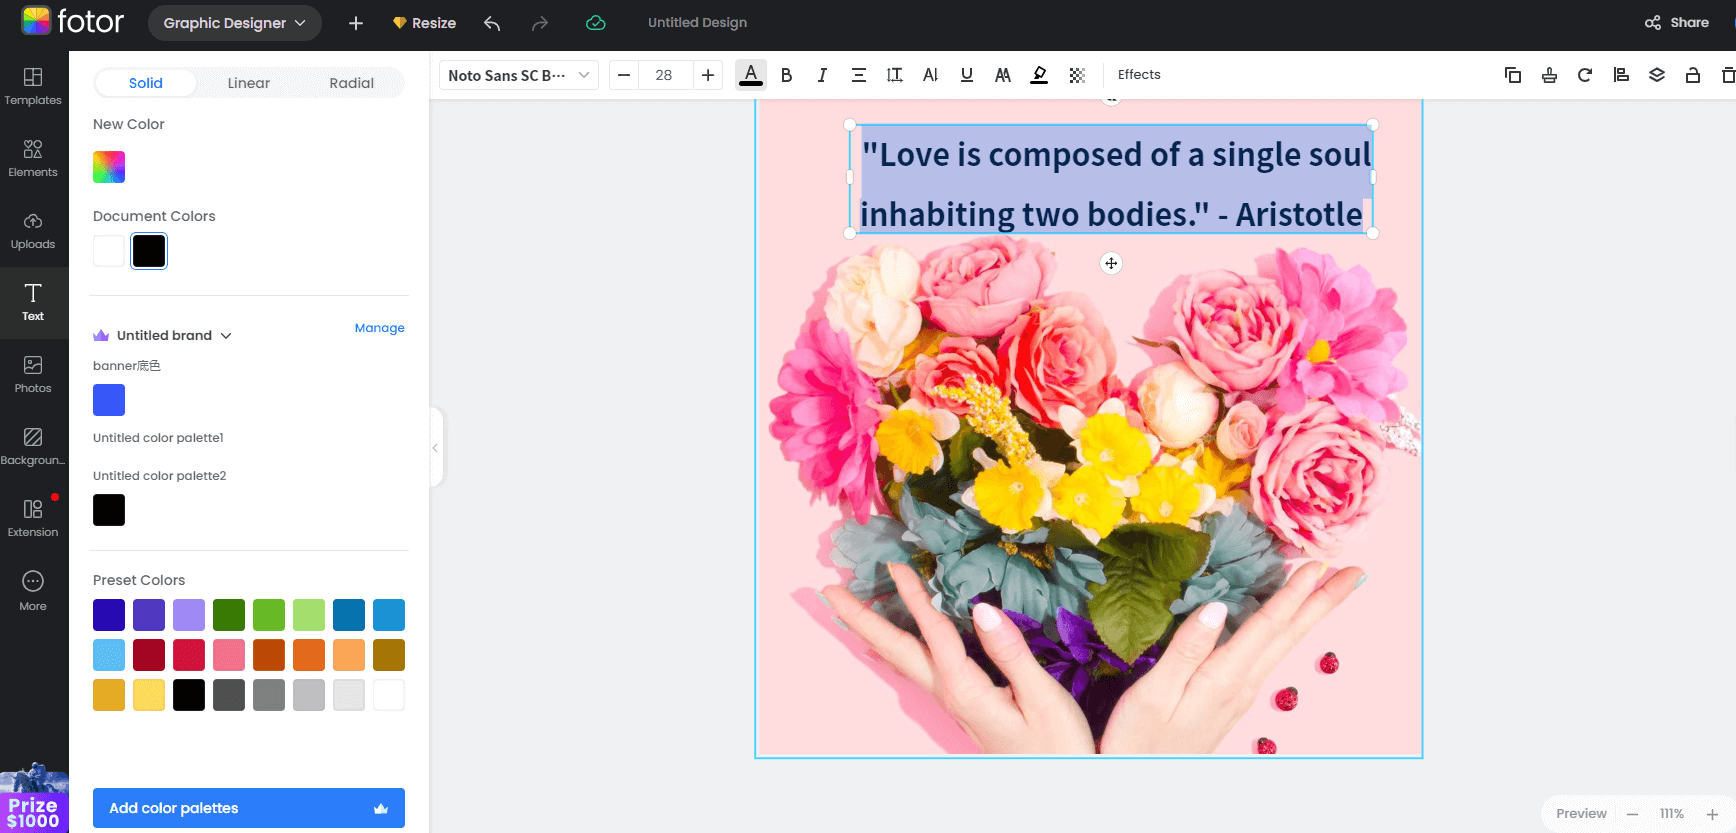 change text color of a love quote on a pink flower card